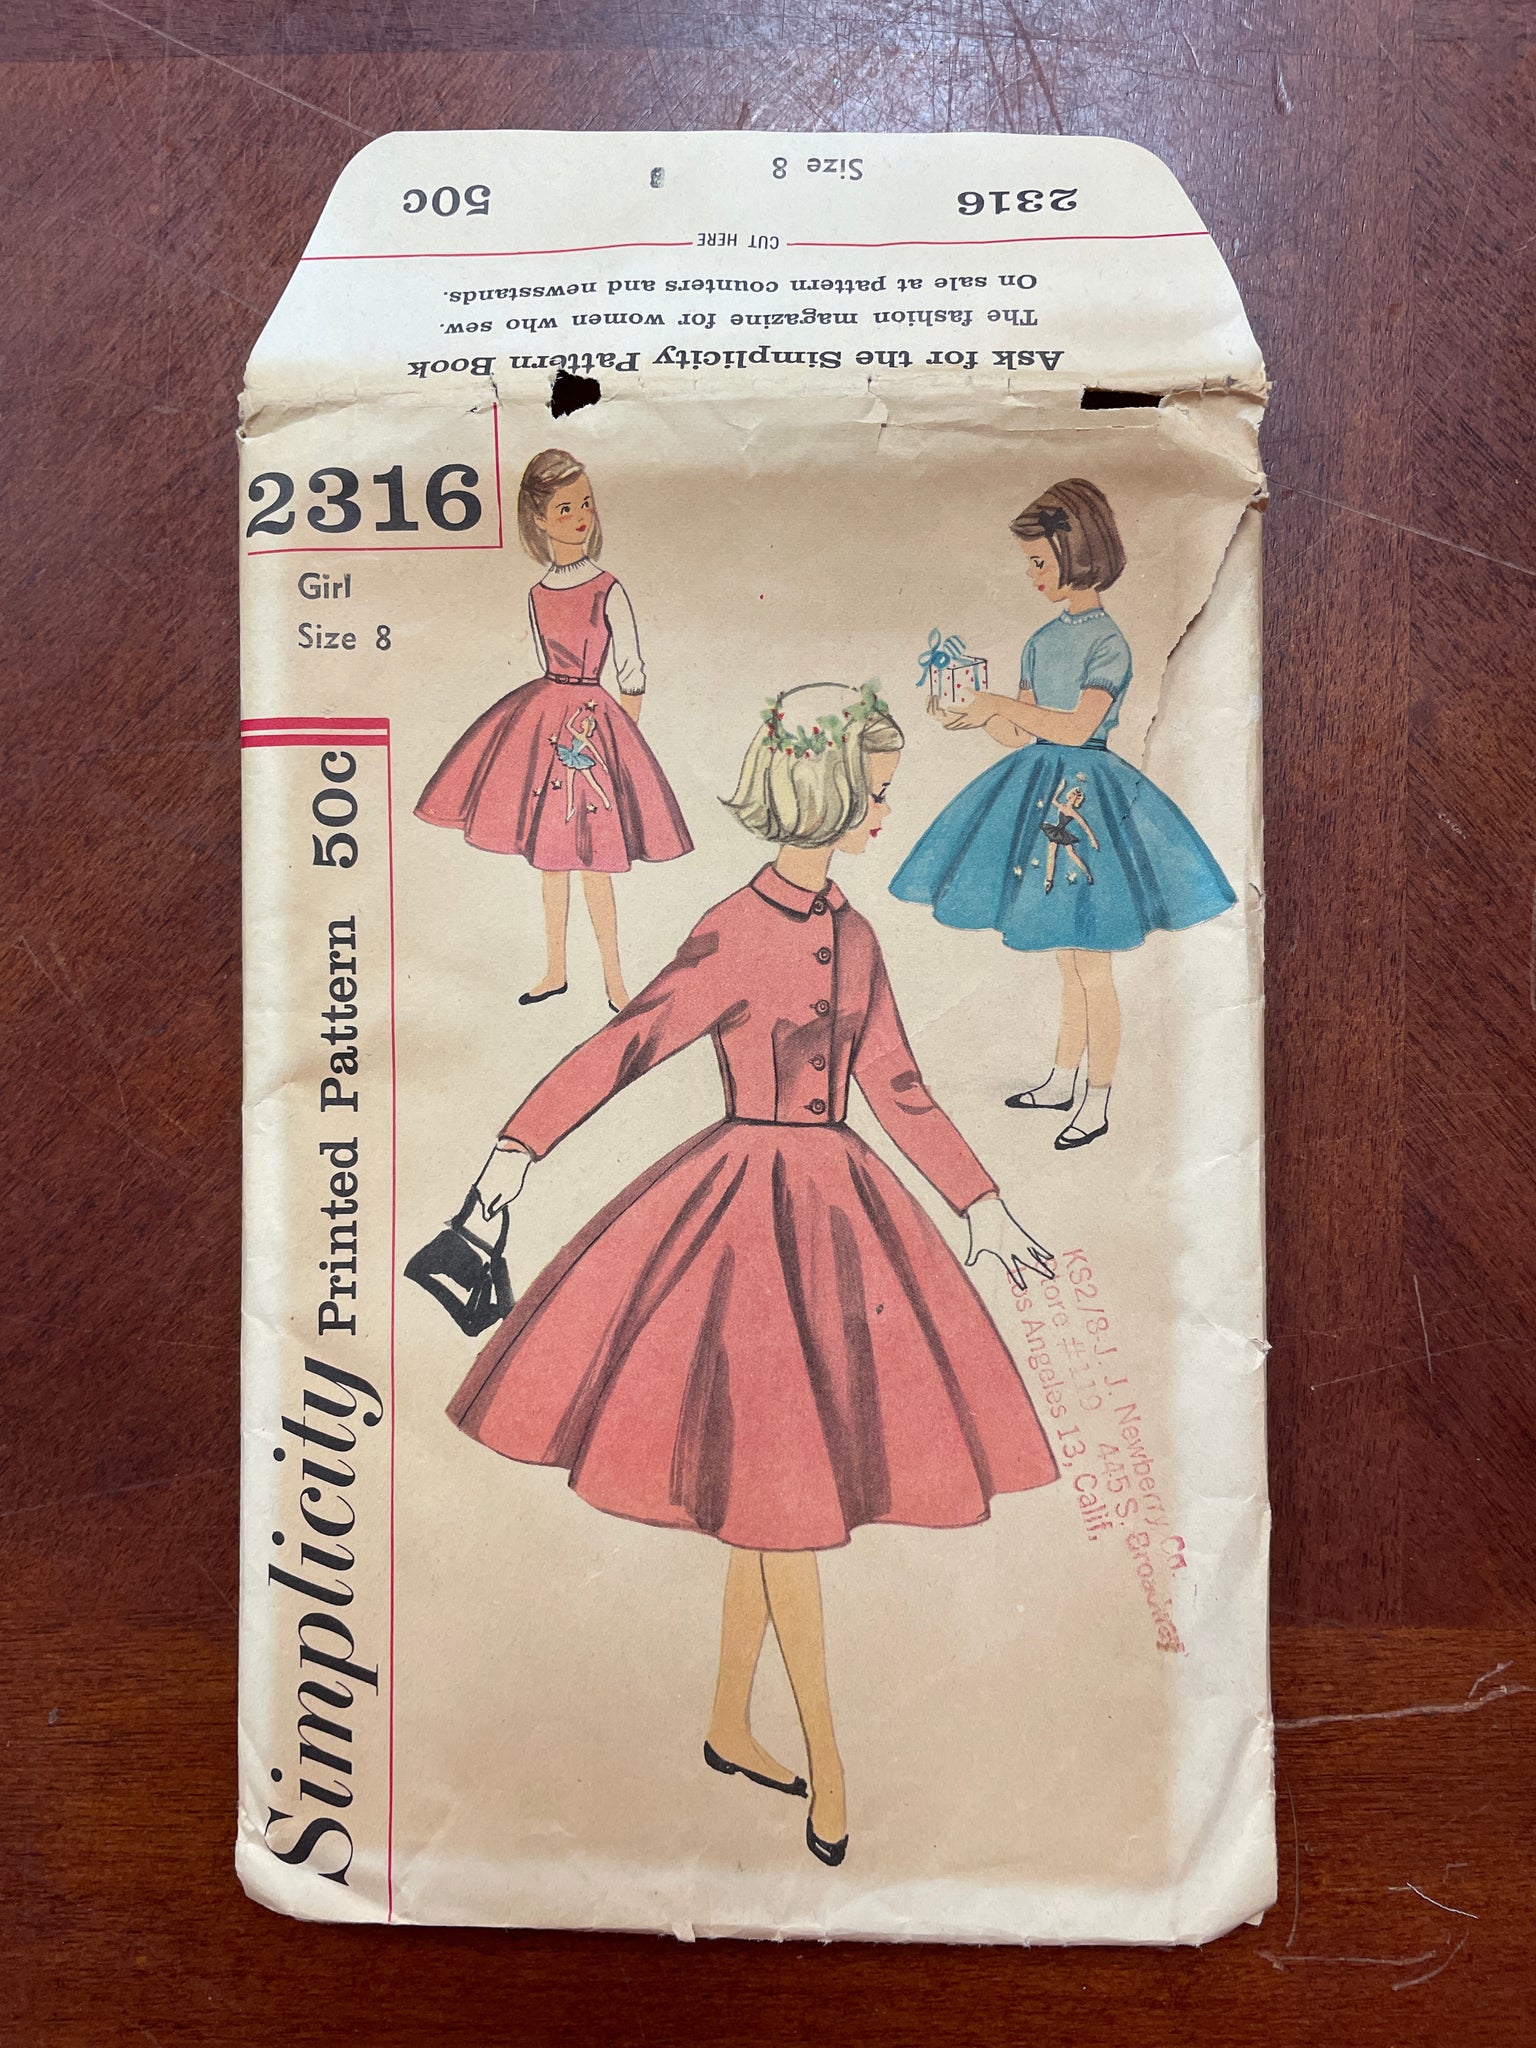 1957 Simplicity 2316 Pattern - Girl's Dress and Jacket FACTORY FOLDED